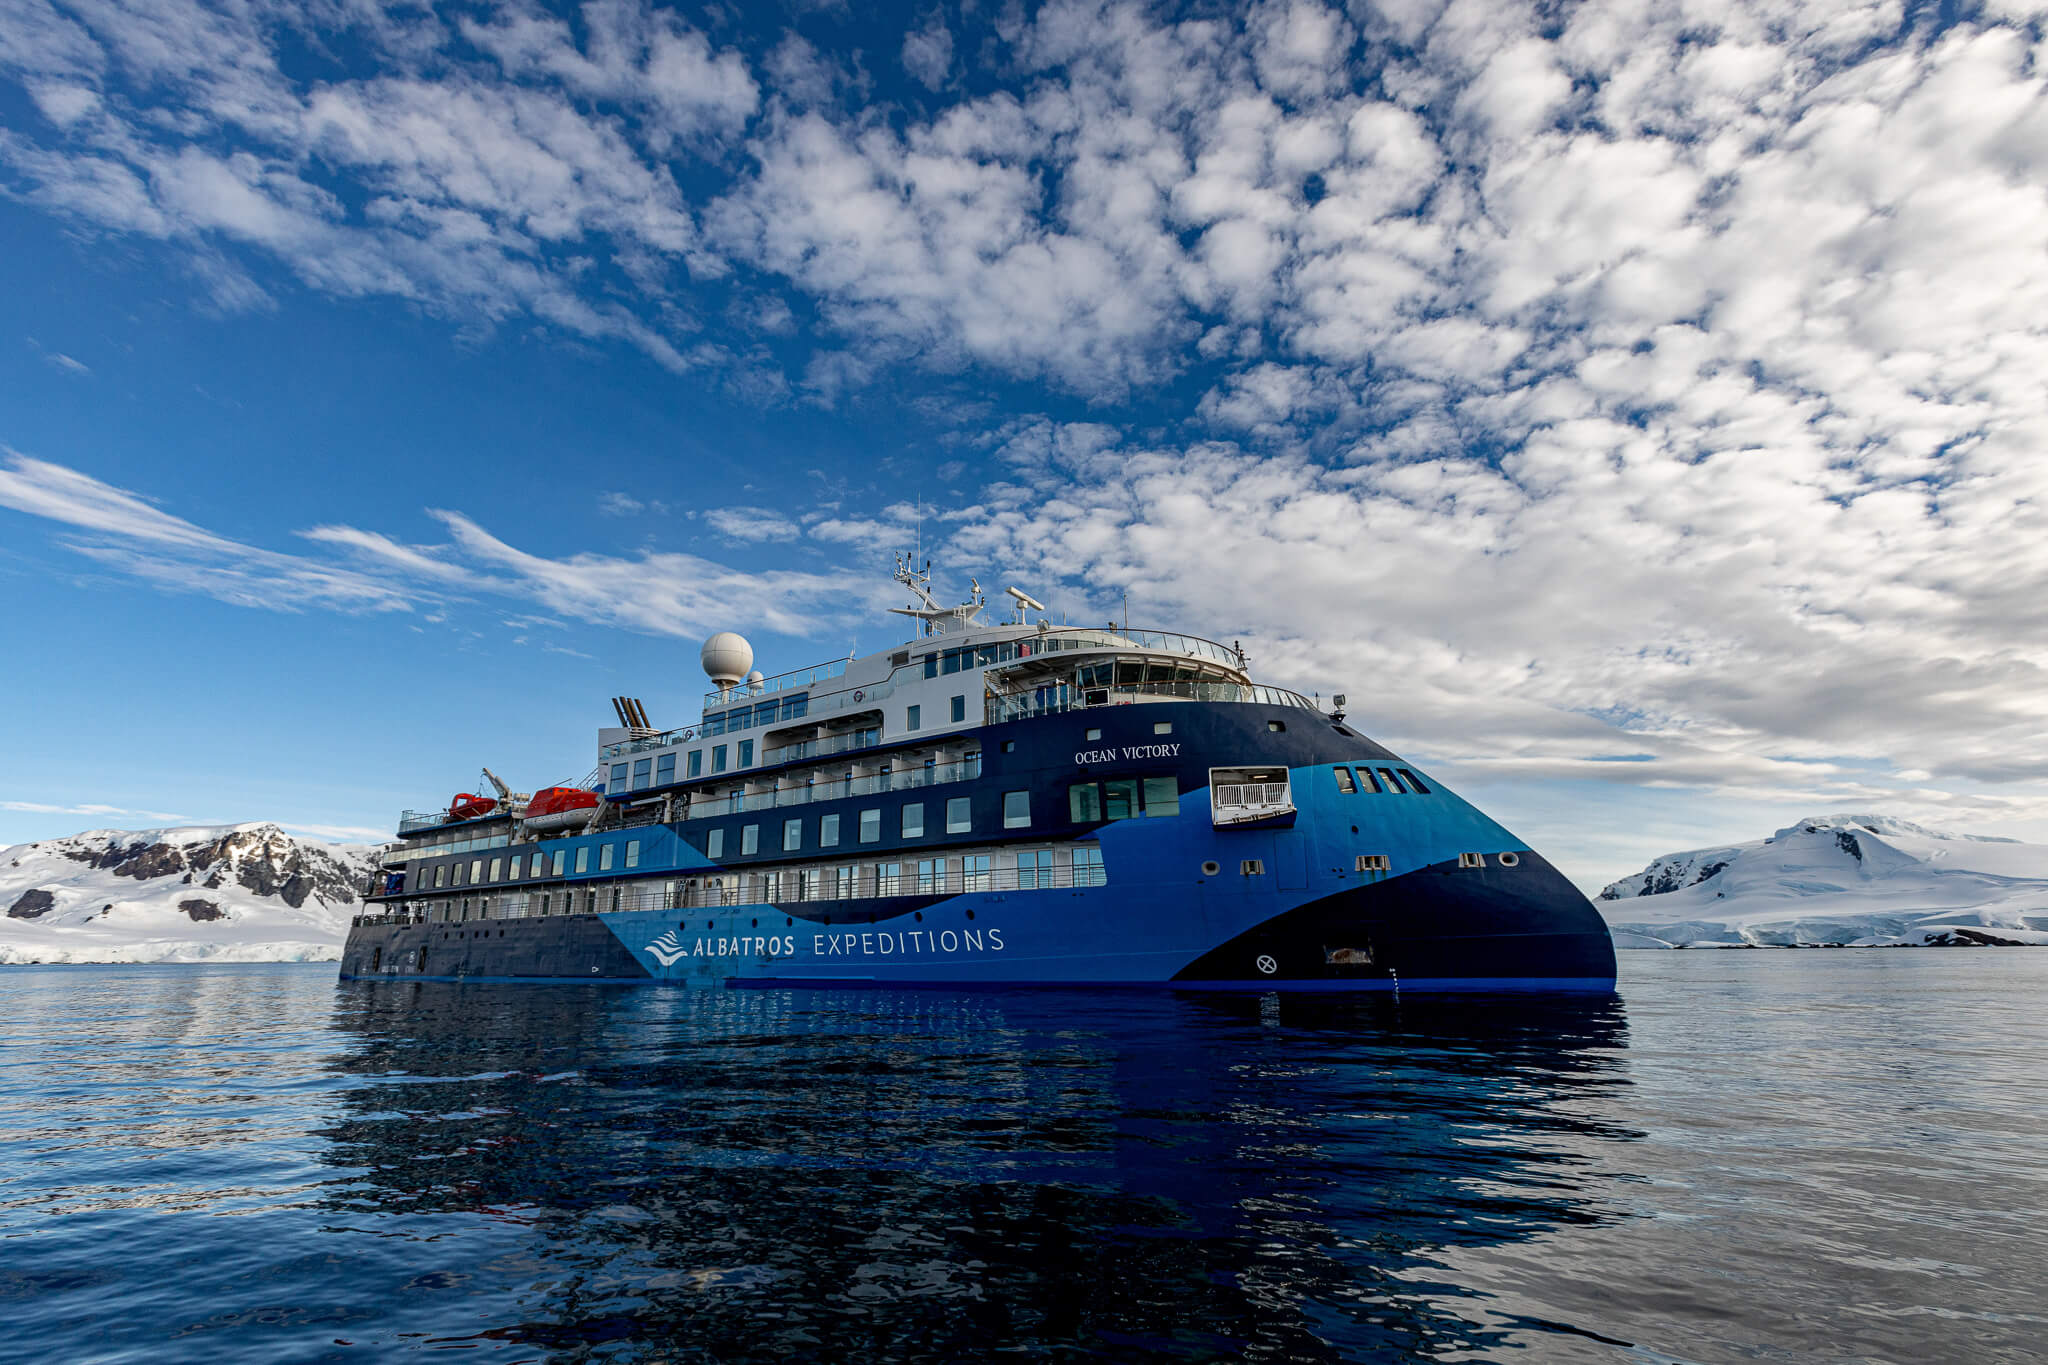 The expedition ship Ocean Victory by © Albatros Expeditions